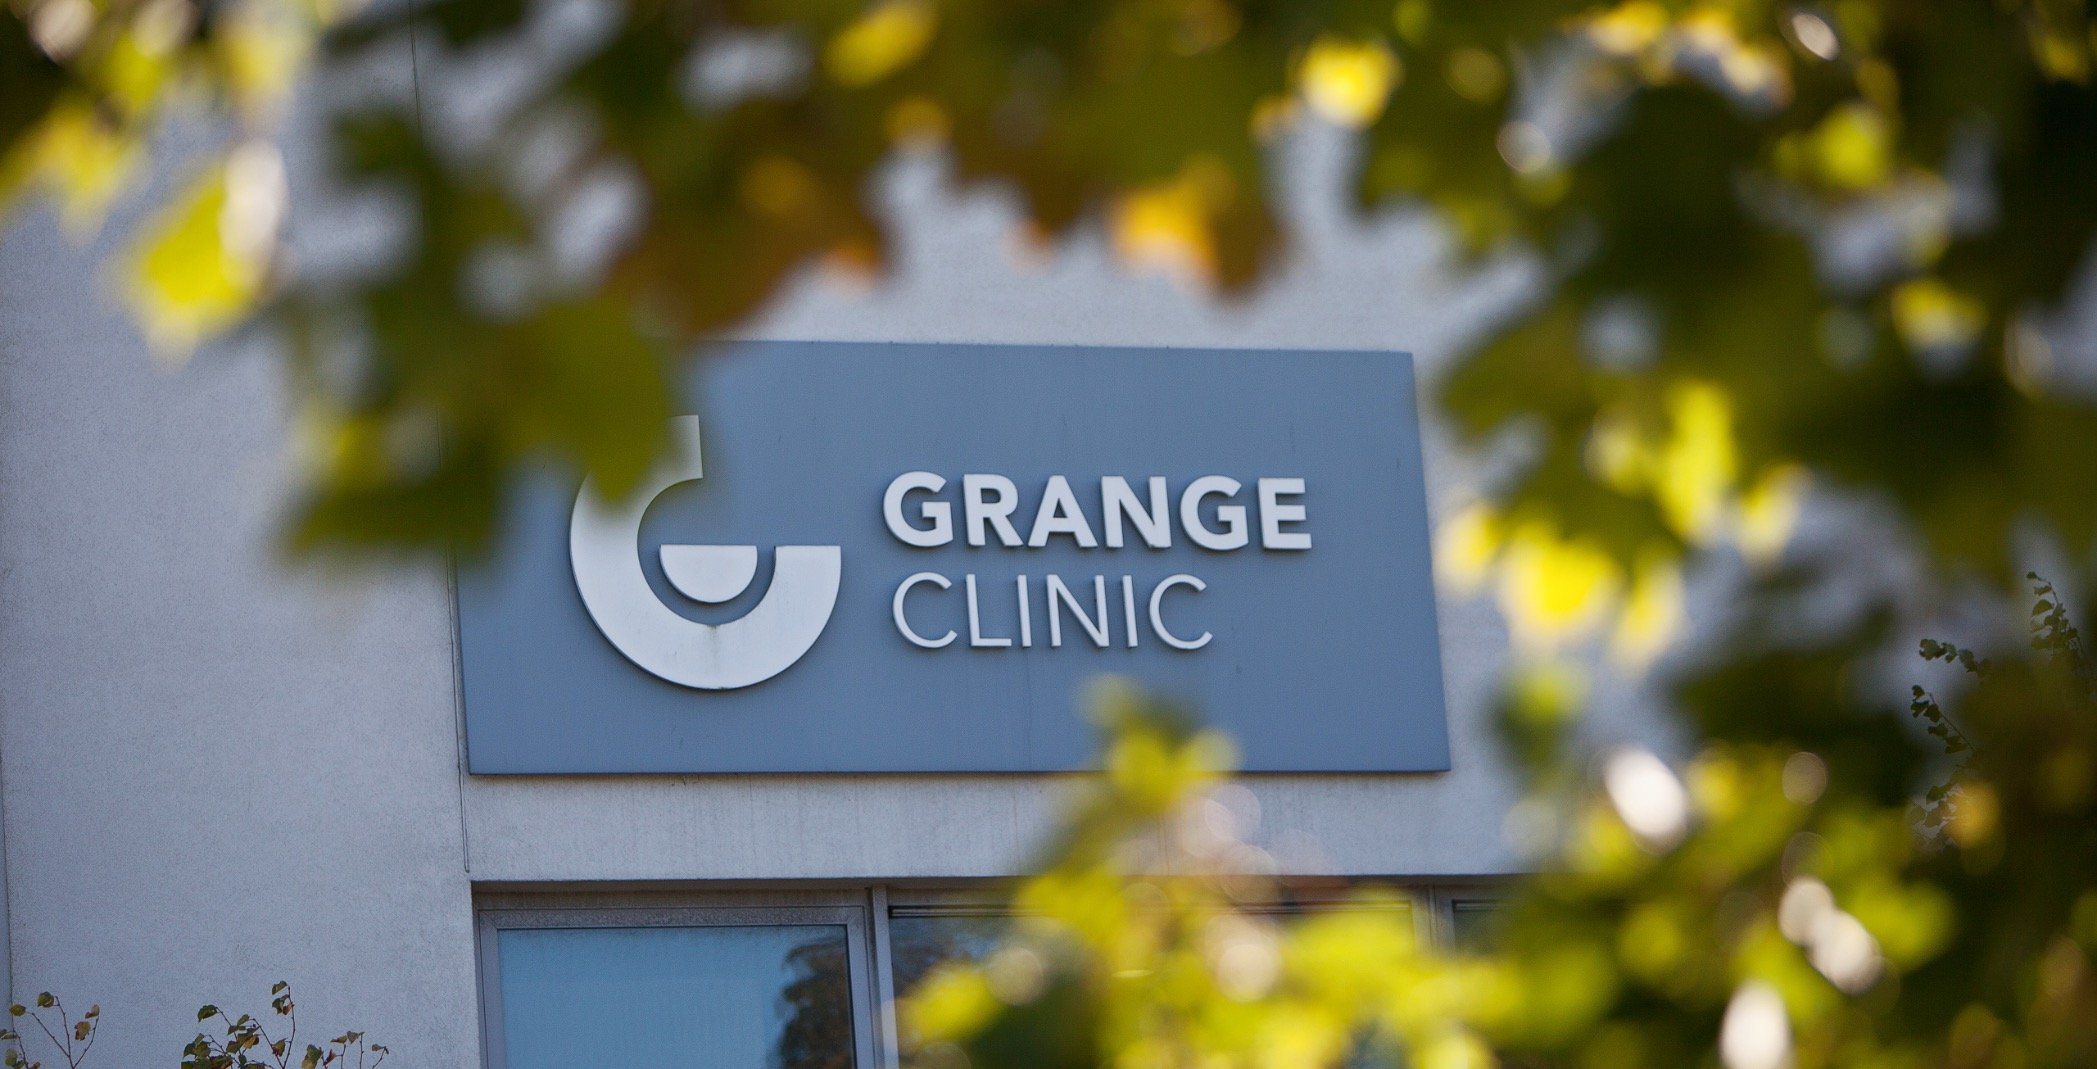 Grange Clinic is a GP practice established over 40 years ago in Dublin 13, caring for the
Donaghmede area and surrounding communities.